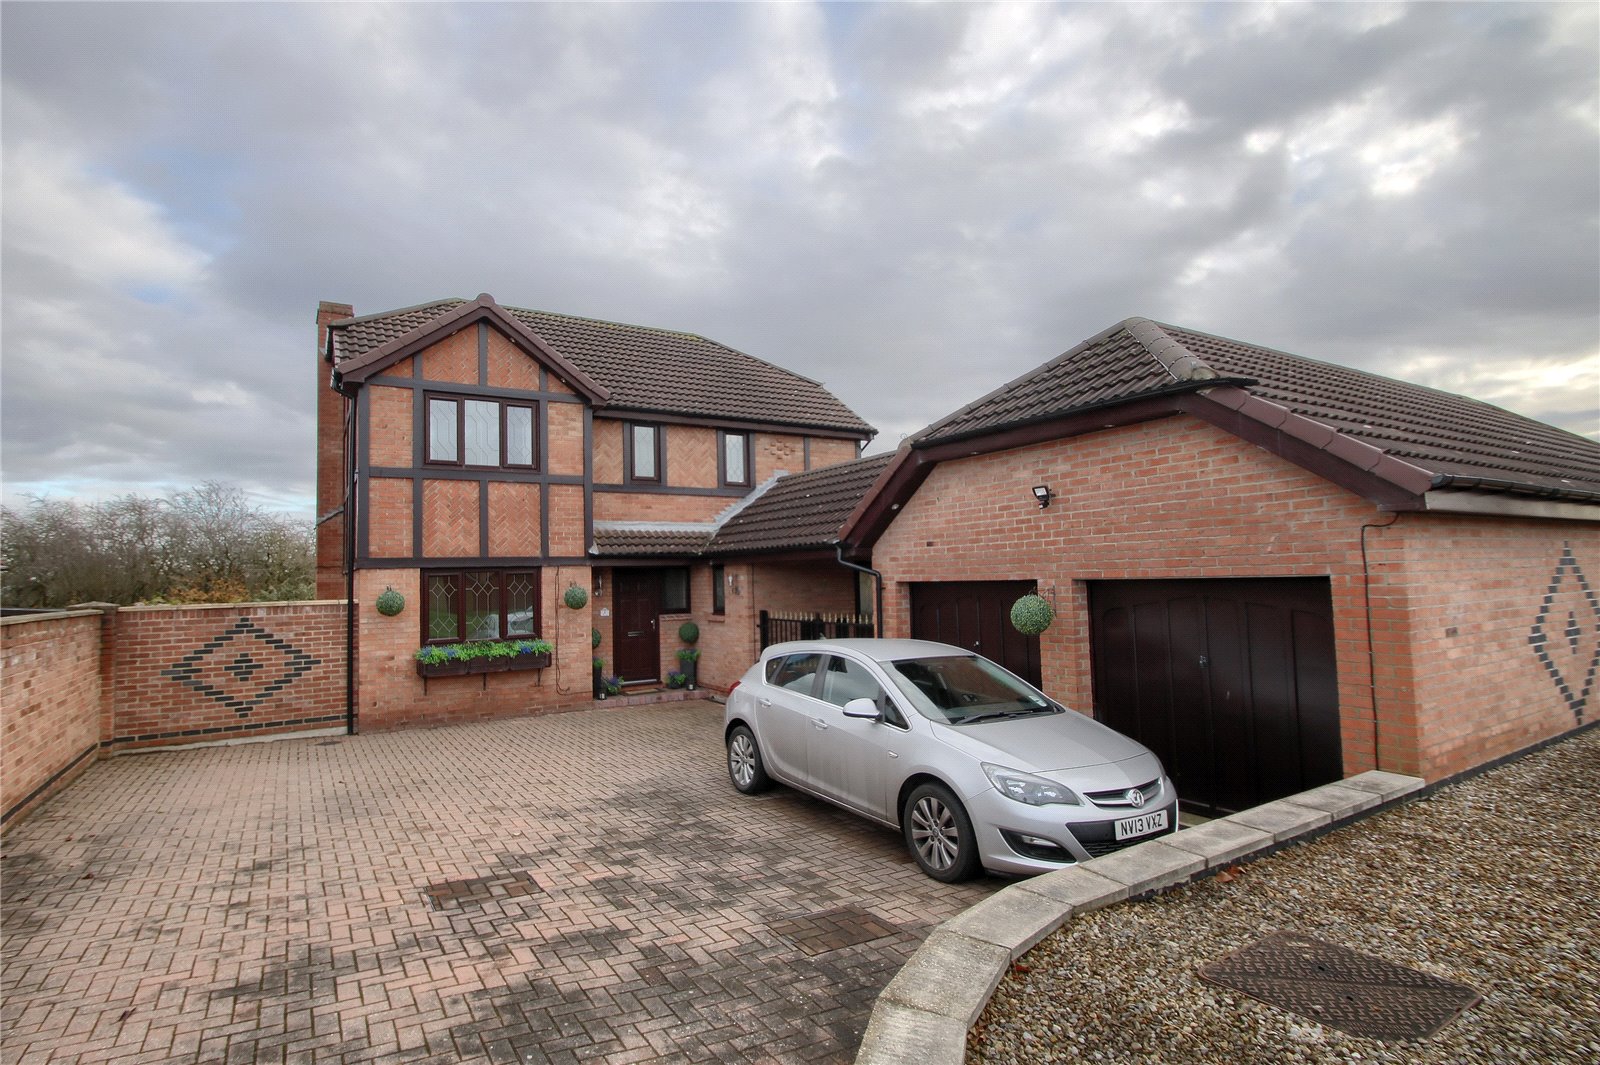 4 bed house for sale in Thorington Gardens, Ingleby Barwick - Property Image 1